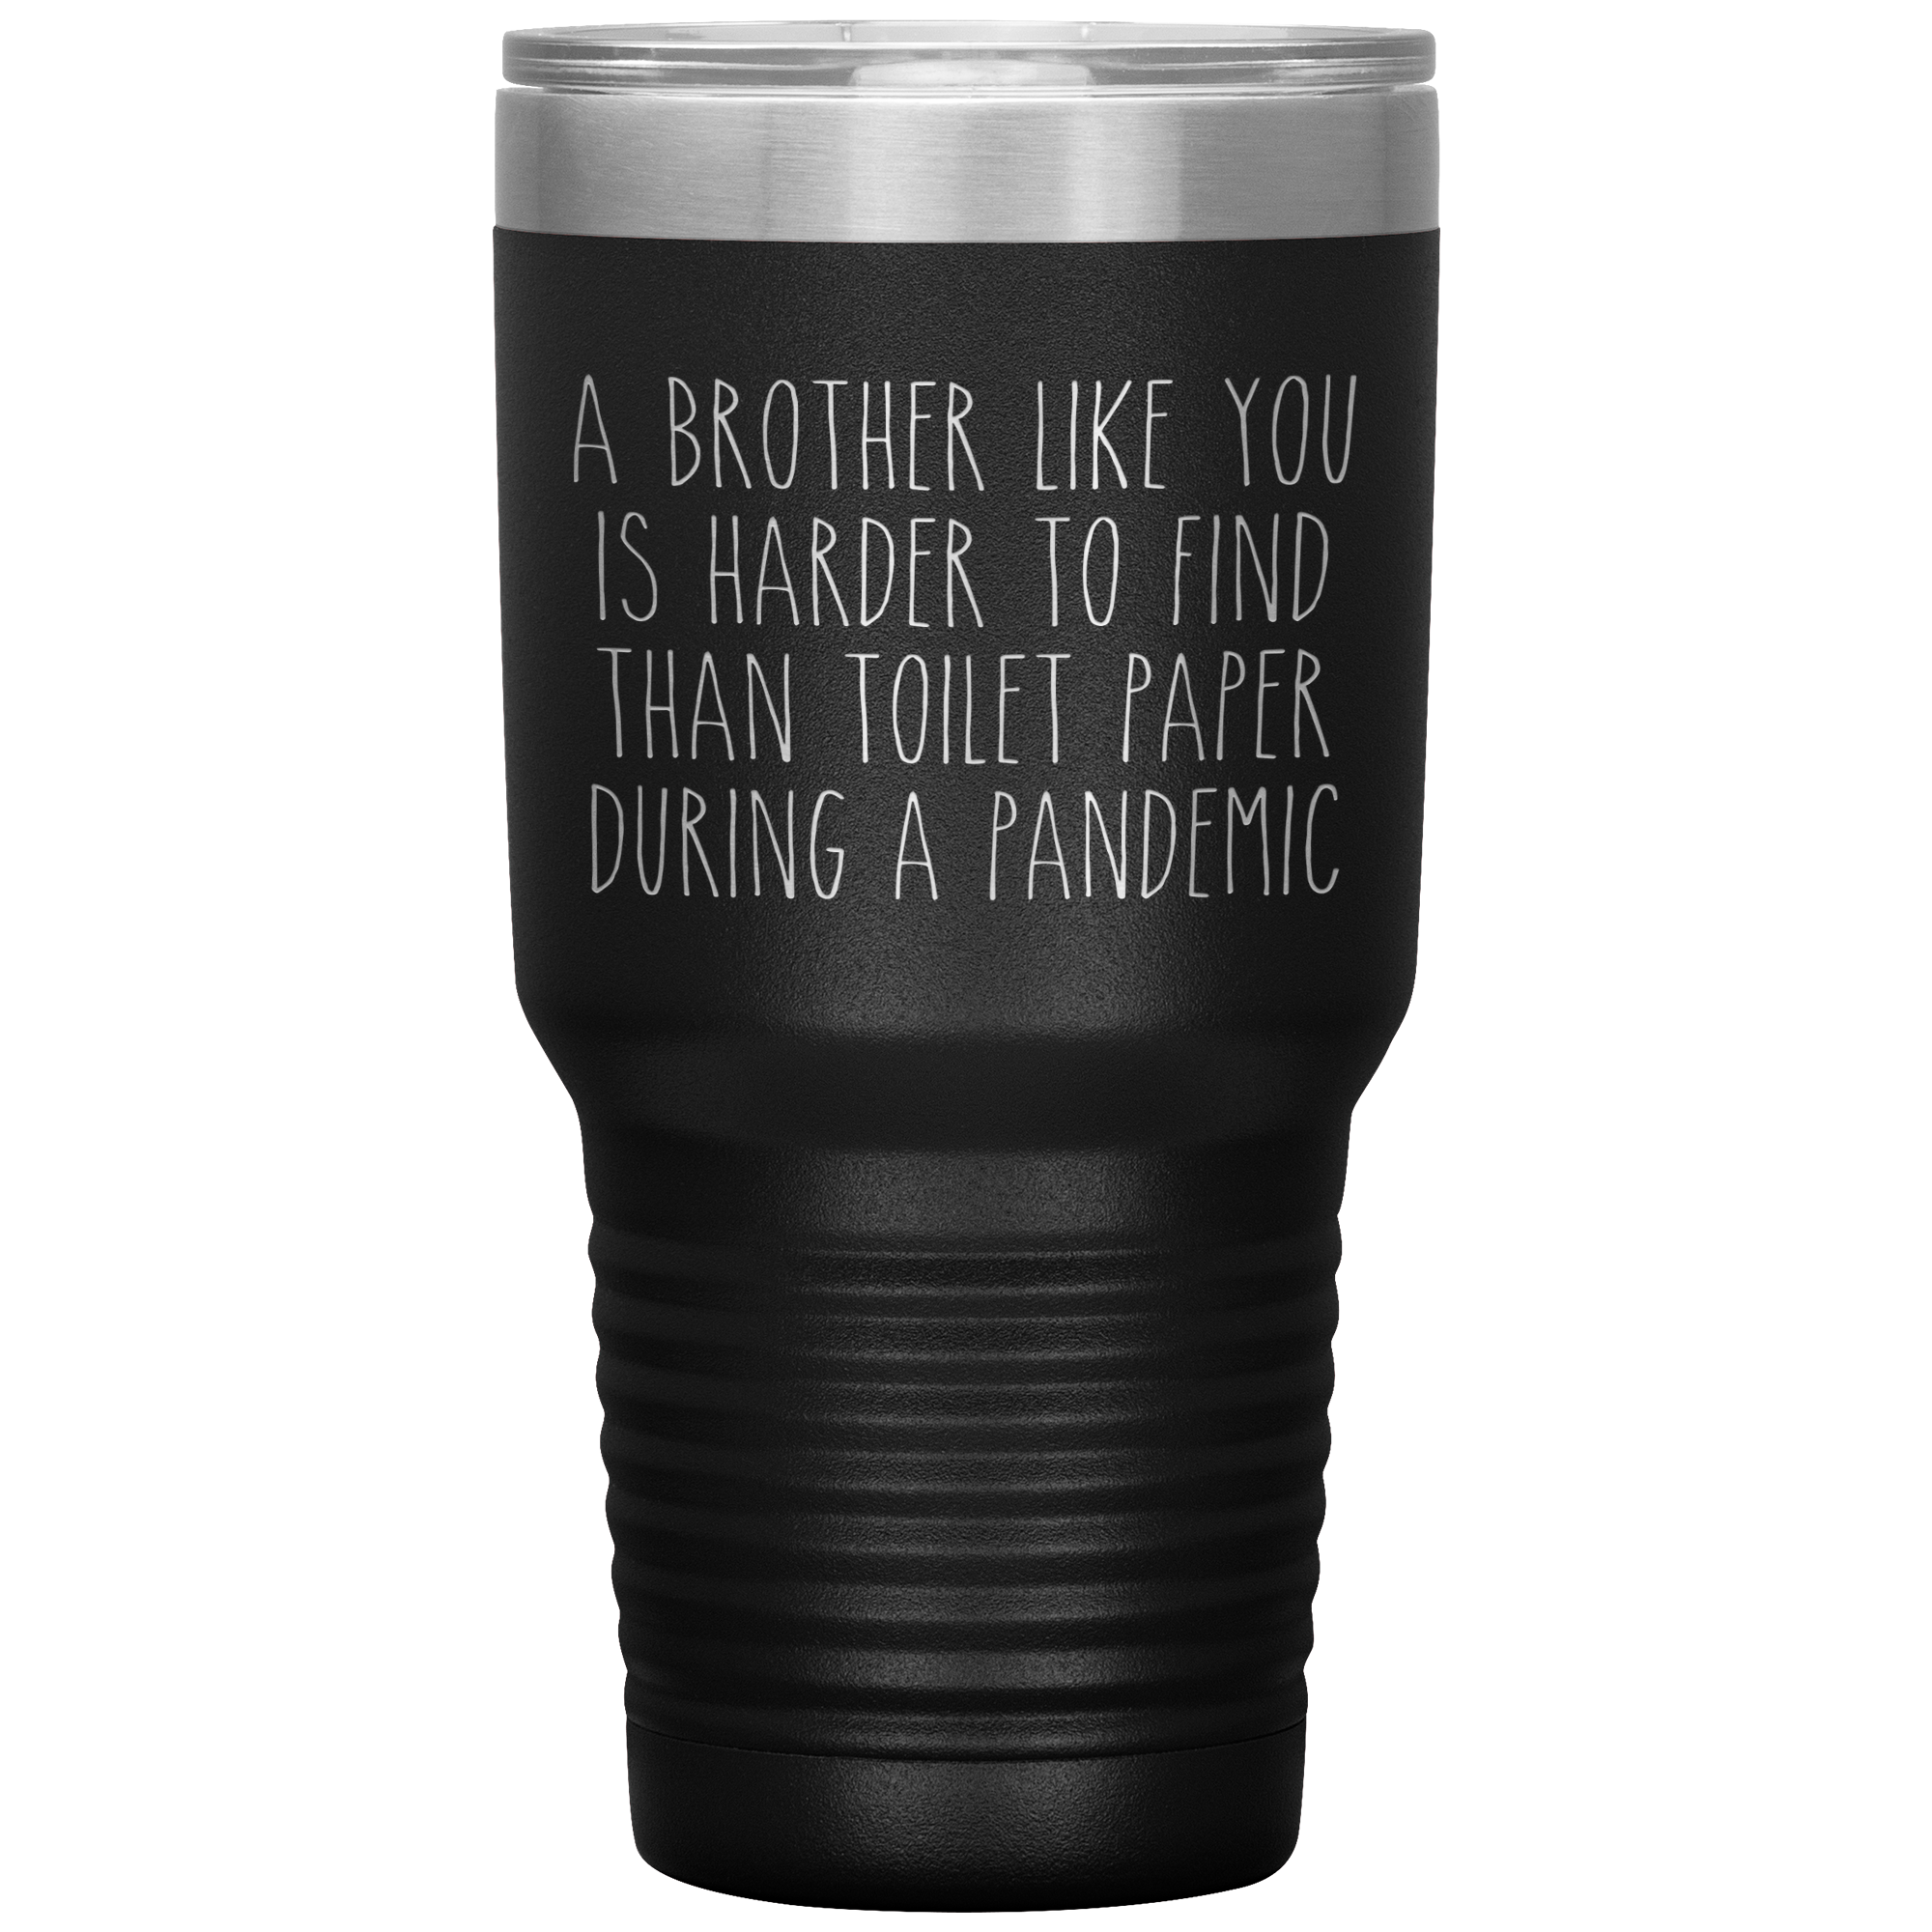 A Brother Like You is Harder to Find Than Toilet Paper During a Pandemic Tumbler Mug Travel Coffee Cup 30oz BPA Free